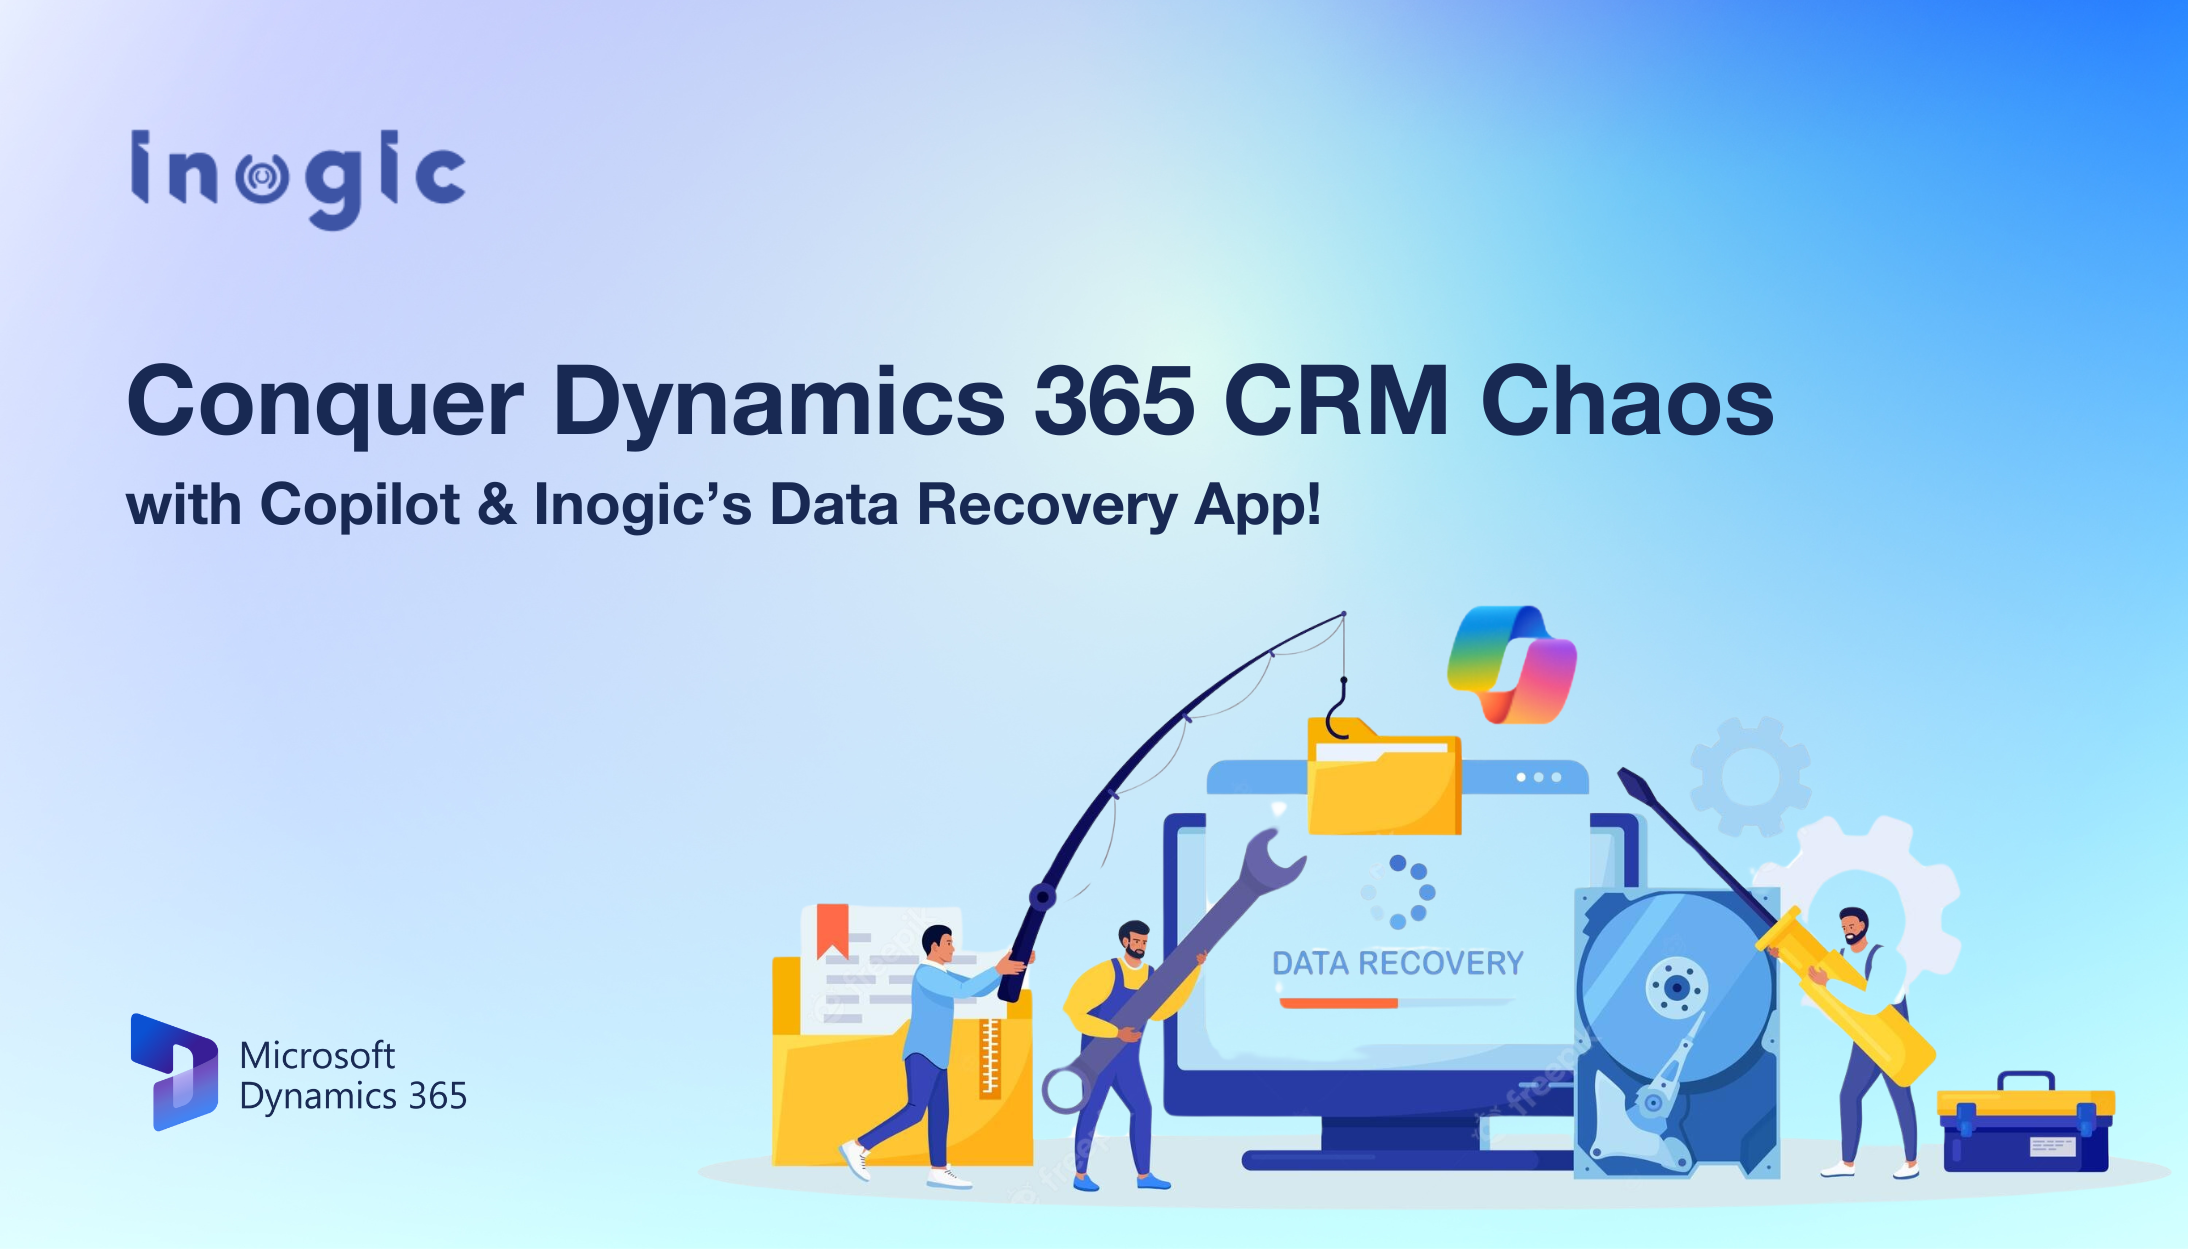 Conquer Dynamics 365 CRM Chaos with Copilot and Inogic Data Recovery App!